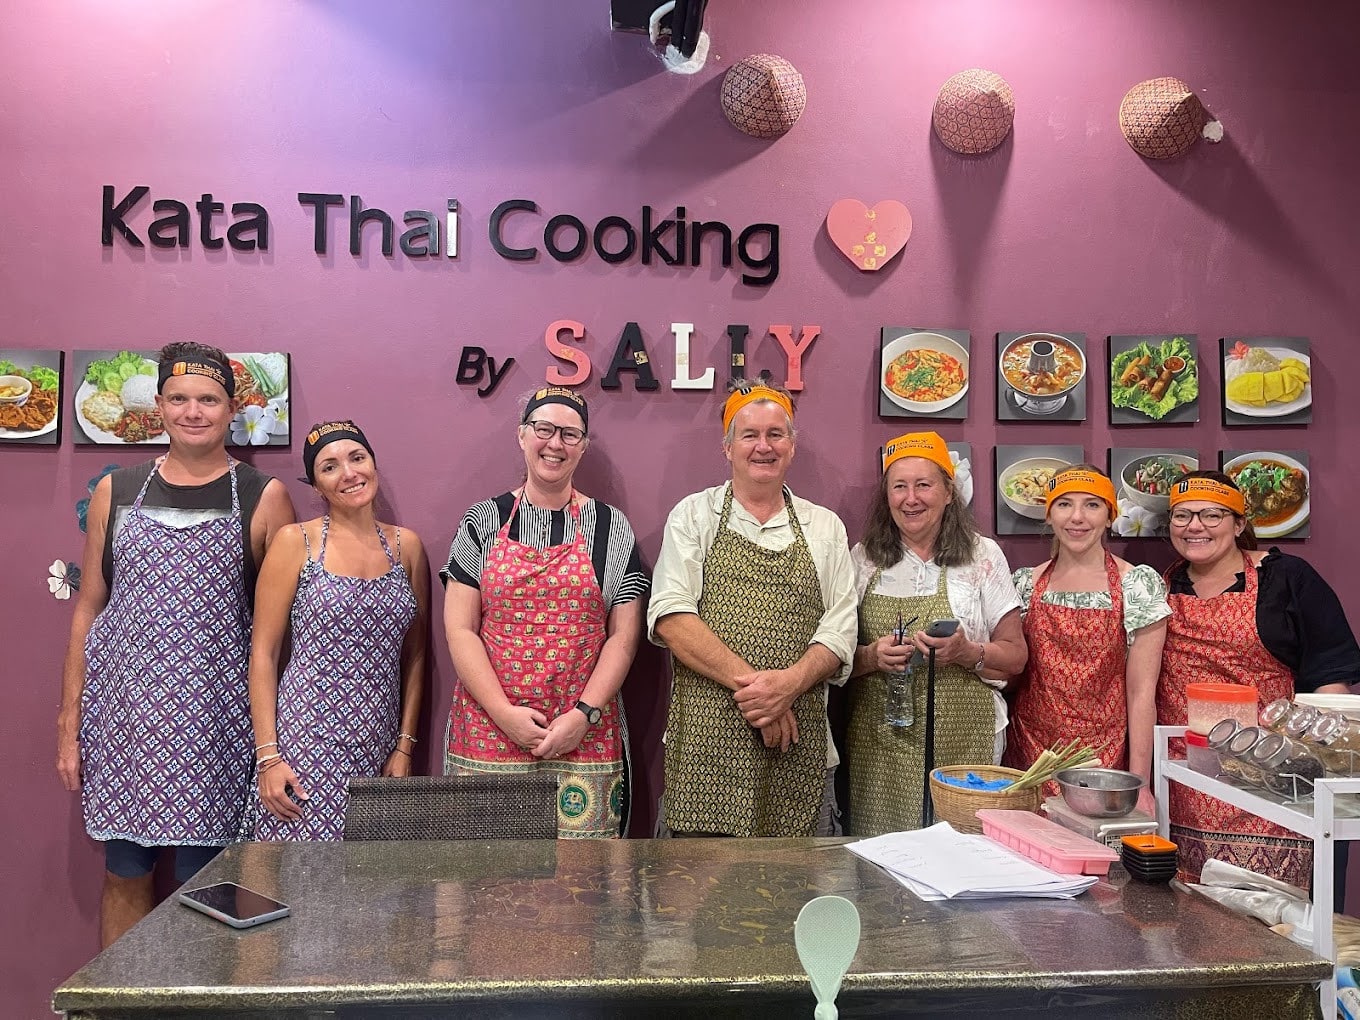 Head Chef Sally with his Students at the Kata Thai Cooking Class